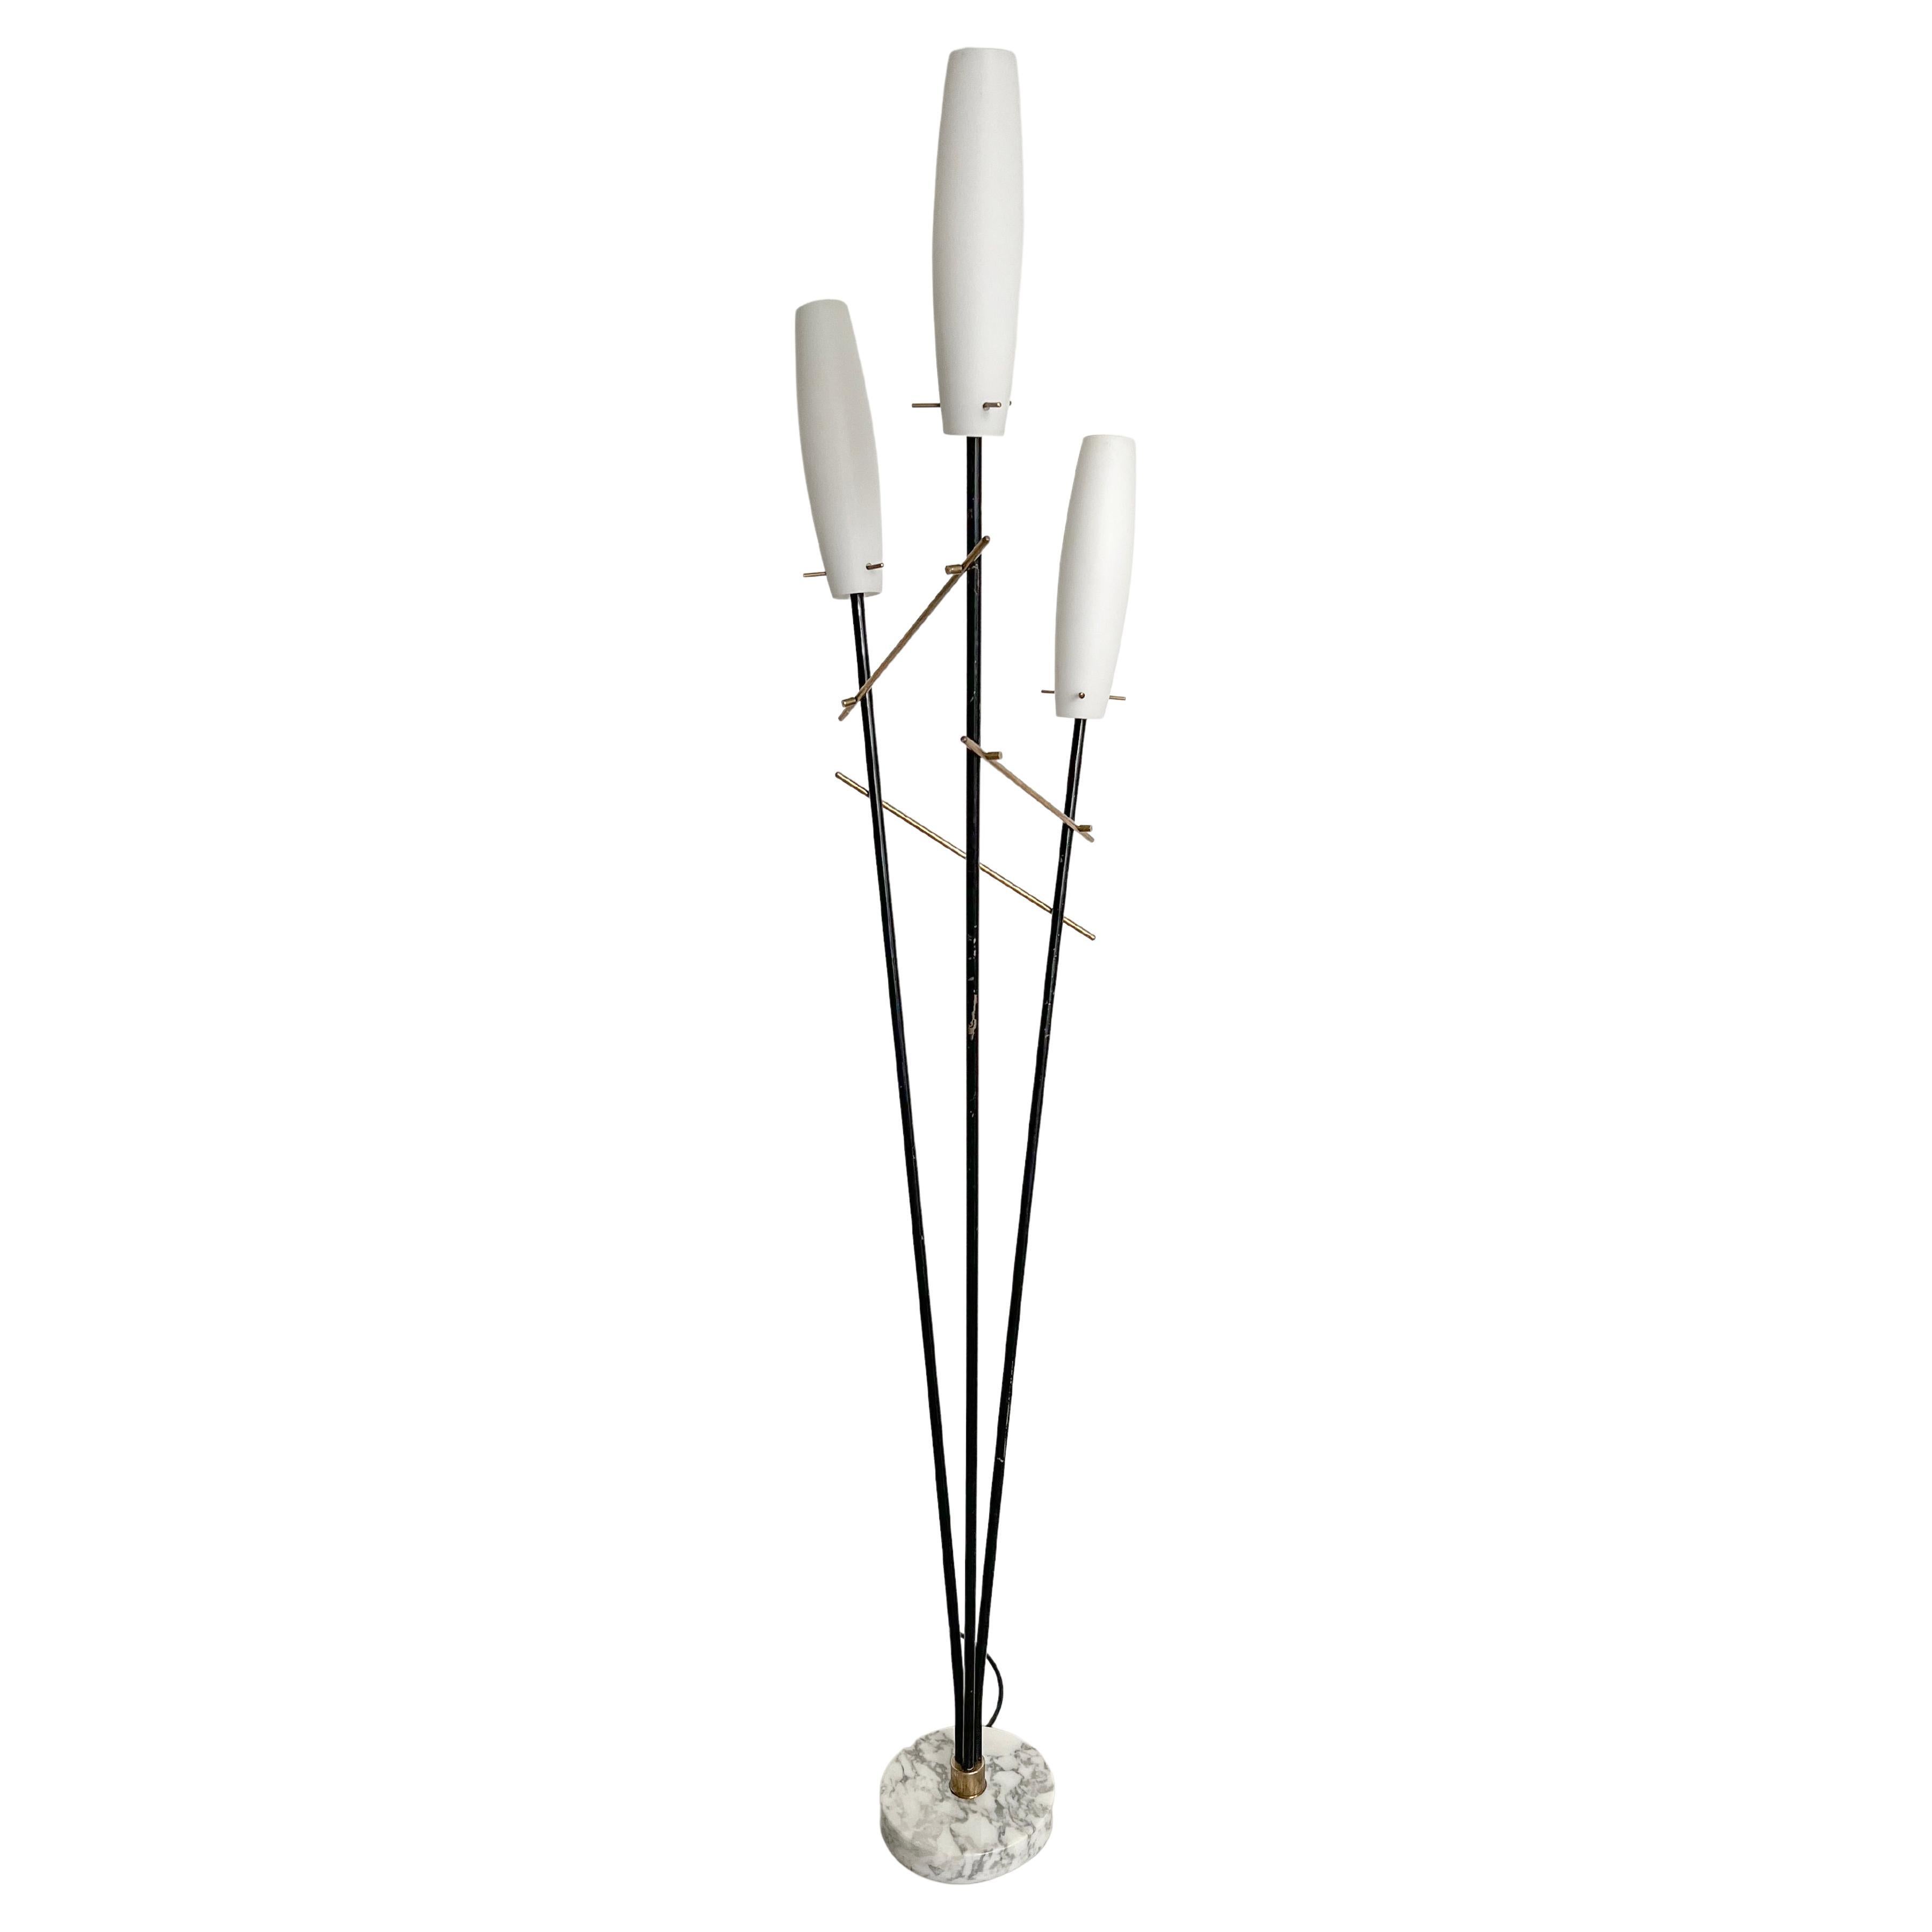 Vintage Decorative Italian Floor Lamp in Brass and Marble , 1950's minimalism For Sale